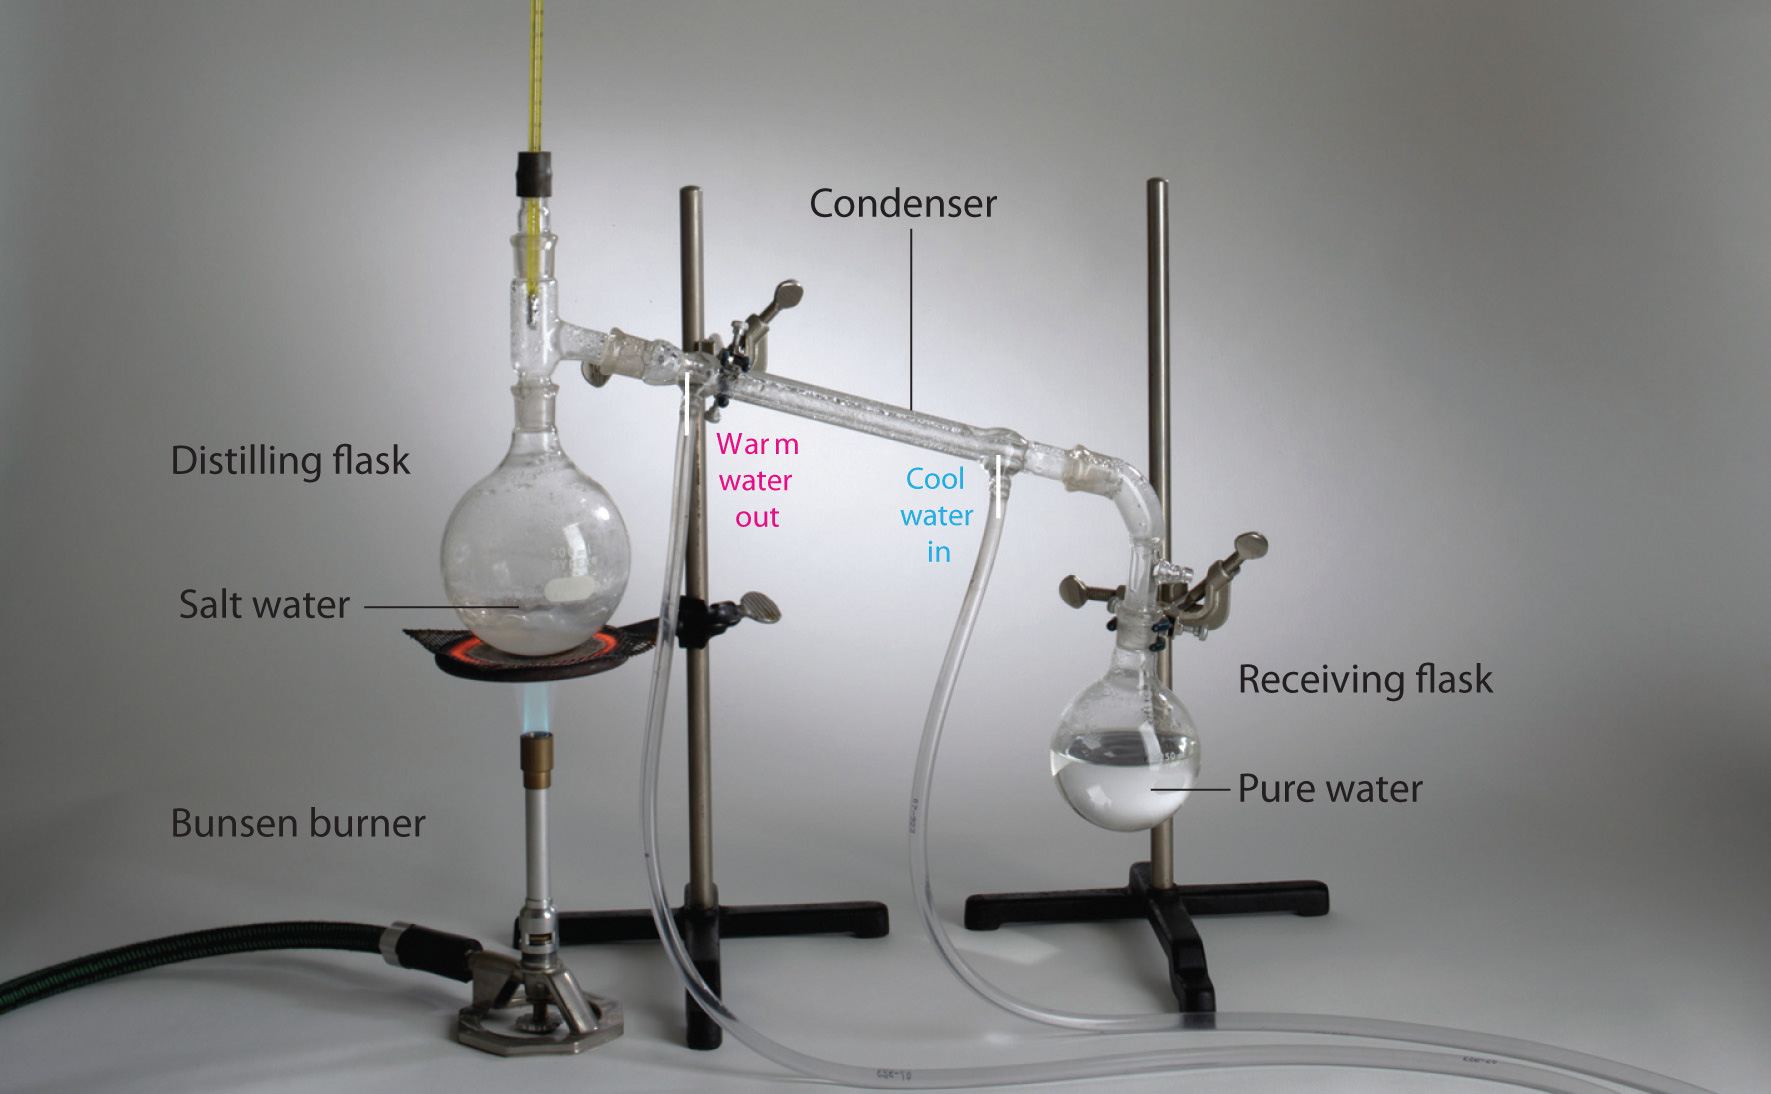 Distillation setup consisting of a bunsen burner under a distilling flask full of salt water. The flask is connected to a condenser leading to the receiving flask.